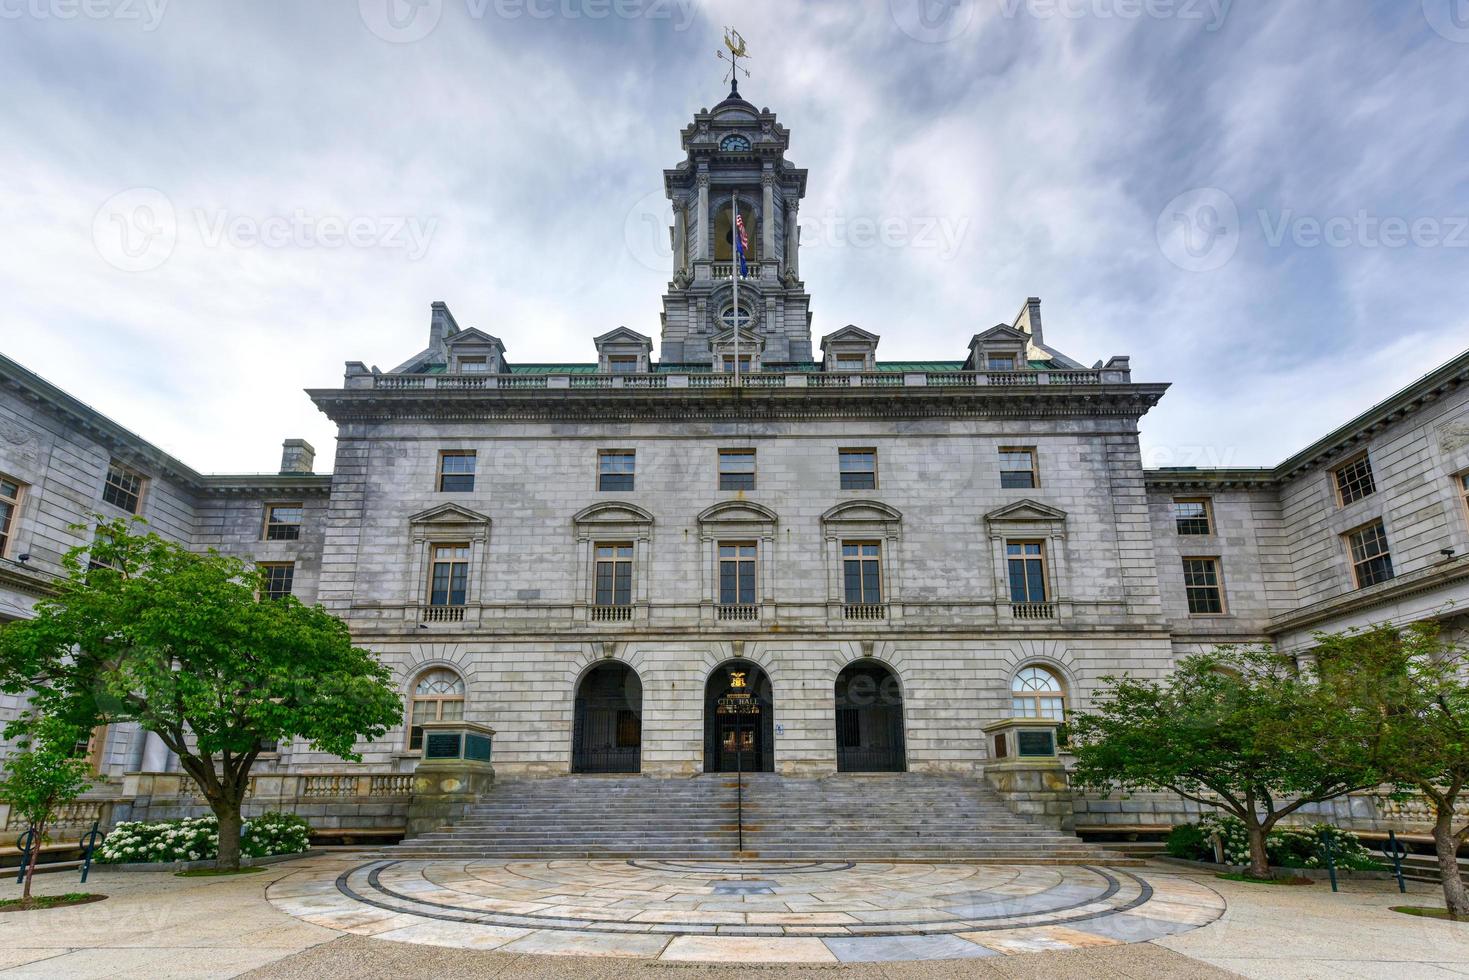 The Portland City Hall is the center of city government in Portland, Maine. photo